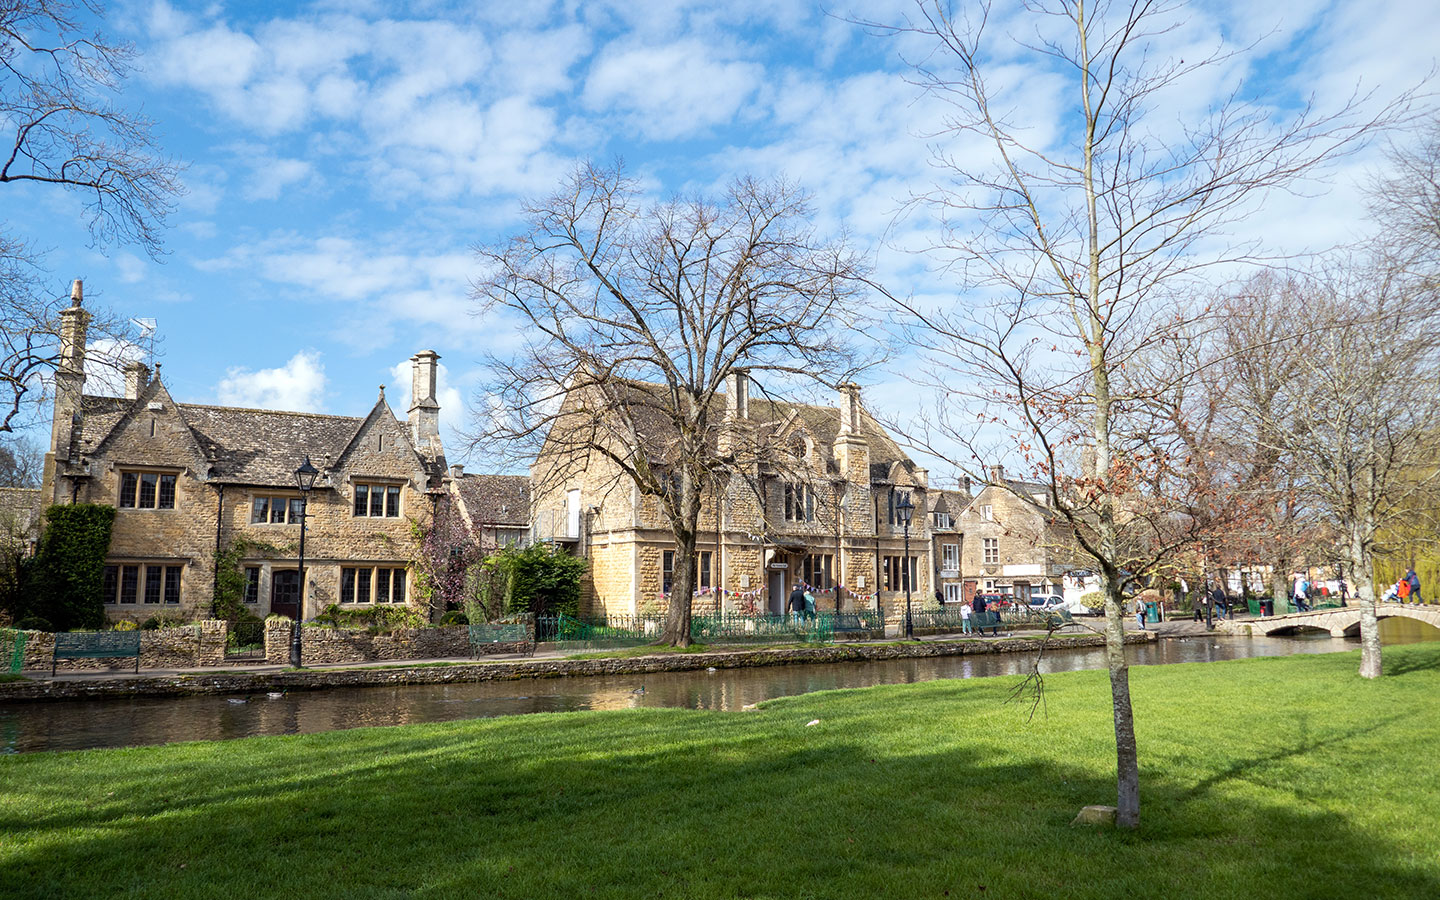 The River Windrush and Bourton's village green